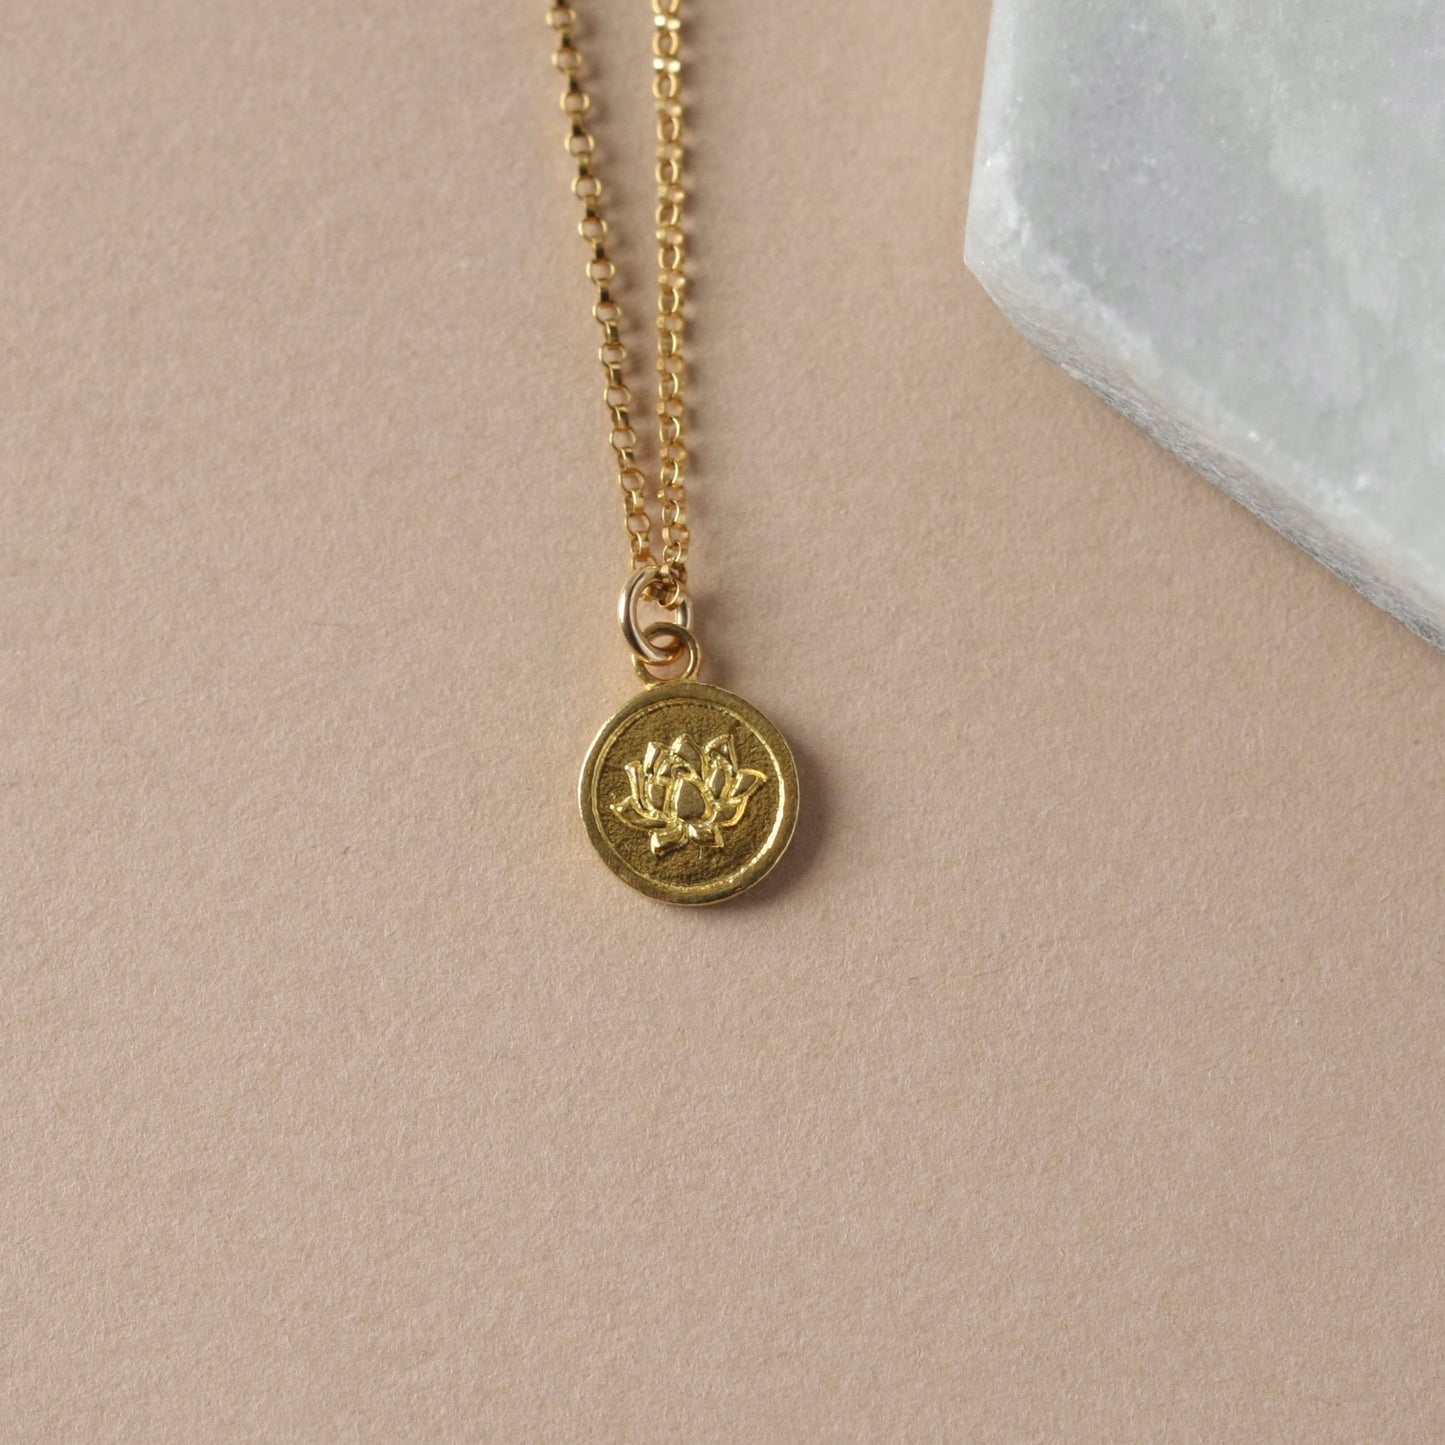 Dainty Gold Flower Charm Necklace